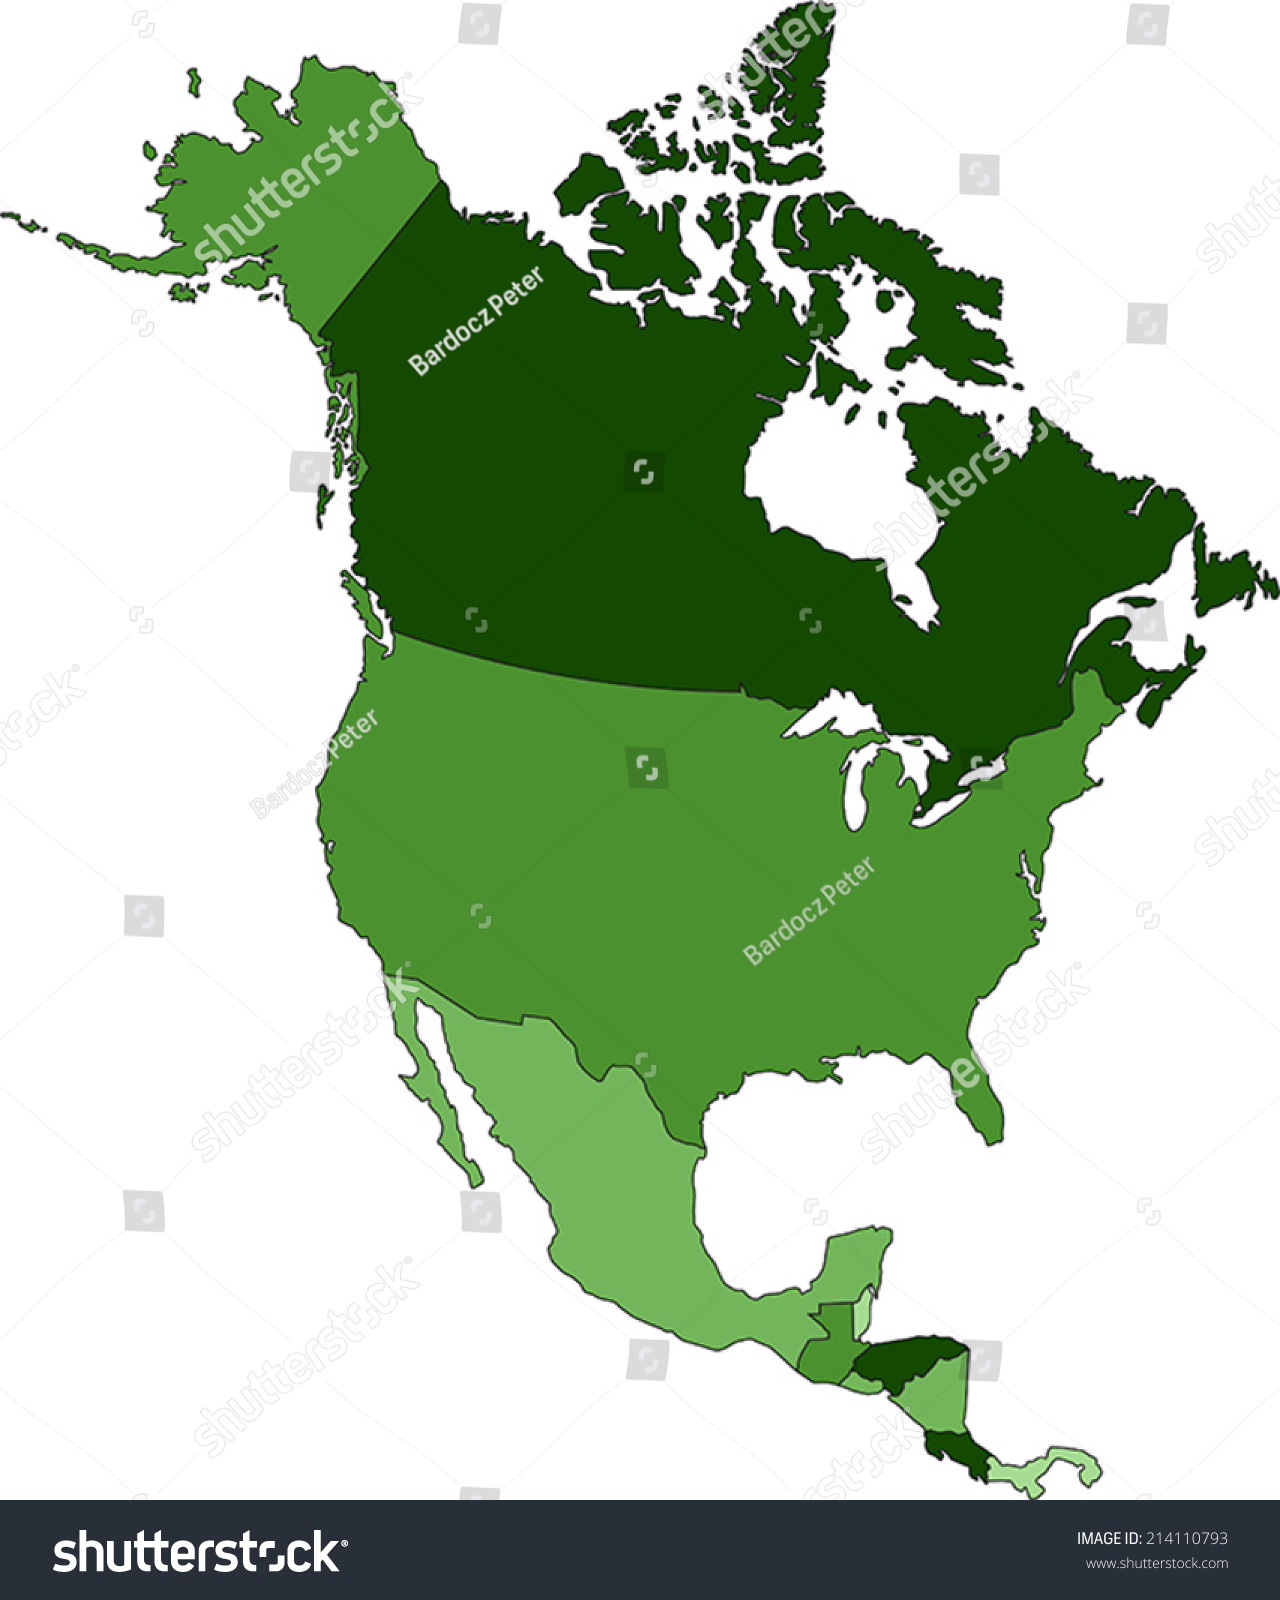 Highly Detailed North America Political Map Stock Vector Royalty Free 214110793 Shutterstock 2896